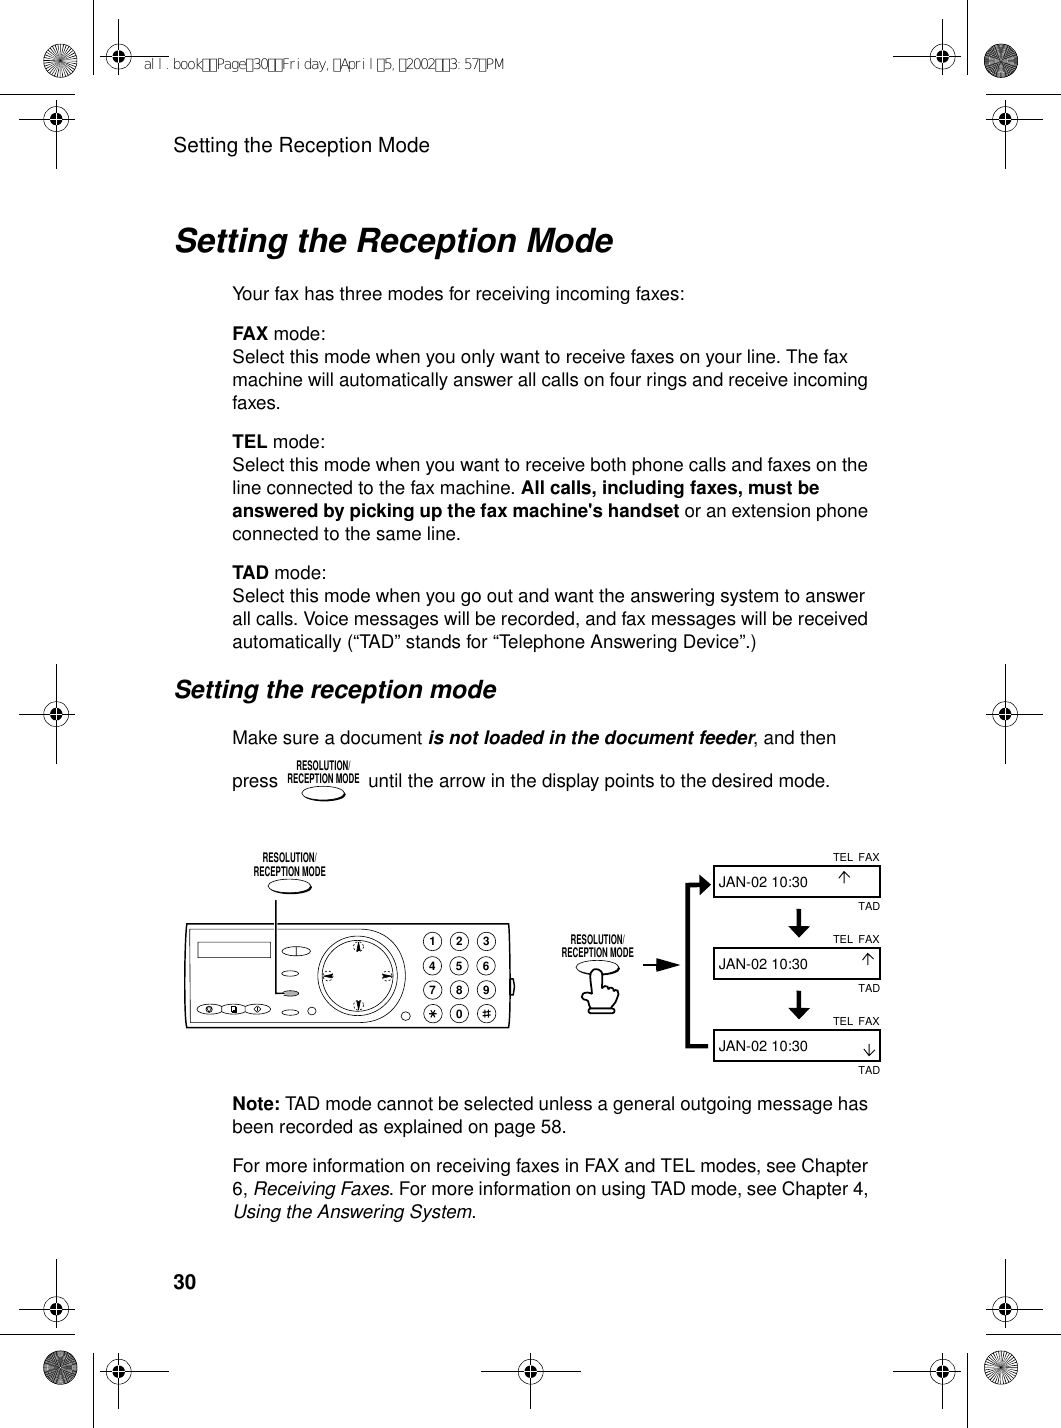 Setting the Reception Mode30Setting the Reception ModeYour fax has three modes for receiving incoming faxes:FAX mode:Select this mode when you only want to receive faxes on your line. The fax machine will automatically answer all calls on four rings and receive incoming faxes.TEL mode:Select this mode when you want to receive both phone calls and faxes on the line connected to the fax machine. All calls, including faxes, must be answered by picking up the fax machine&apos;s handset or an extension phone connected to the same line.TAD mode:Select this mode when you go out and want the answering system to answer all calls. Voice messages will be recorded, and fax messages will be received automatically (“TAD” stands for “Telephone Answering Device”.)Setting the reception modeMake sure a document is not loaded in the document feeder, and then press   until the arrow in the display points to the desired mode.RESOLUTION/RECEPTION MODENote: TAD mode cannot be selected unless a general outgoing message has been recorded as explained on page 58.For more information on receiving faxes in FAX and TEL modes, see Chapter 6, Receiving Faxes. For more information on using TAD mode, see Chapter 4, Using the Answering System.FAXTELJAN-02 10:30FAXTELJAN-02 10:30FAXTELJAN-02 10:30TADTADTAD1945 67802 3RESOLUTION/RECEPTION MODERESOLUTION/RECEPTION MODEall.bookPage30Friday,April5,20023:57PM